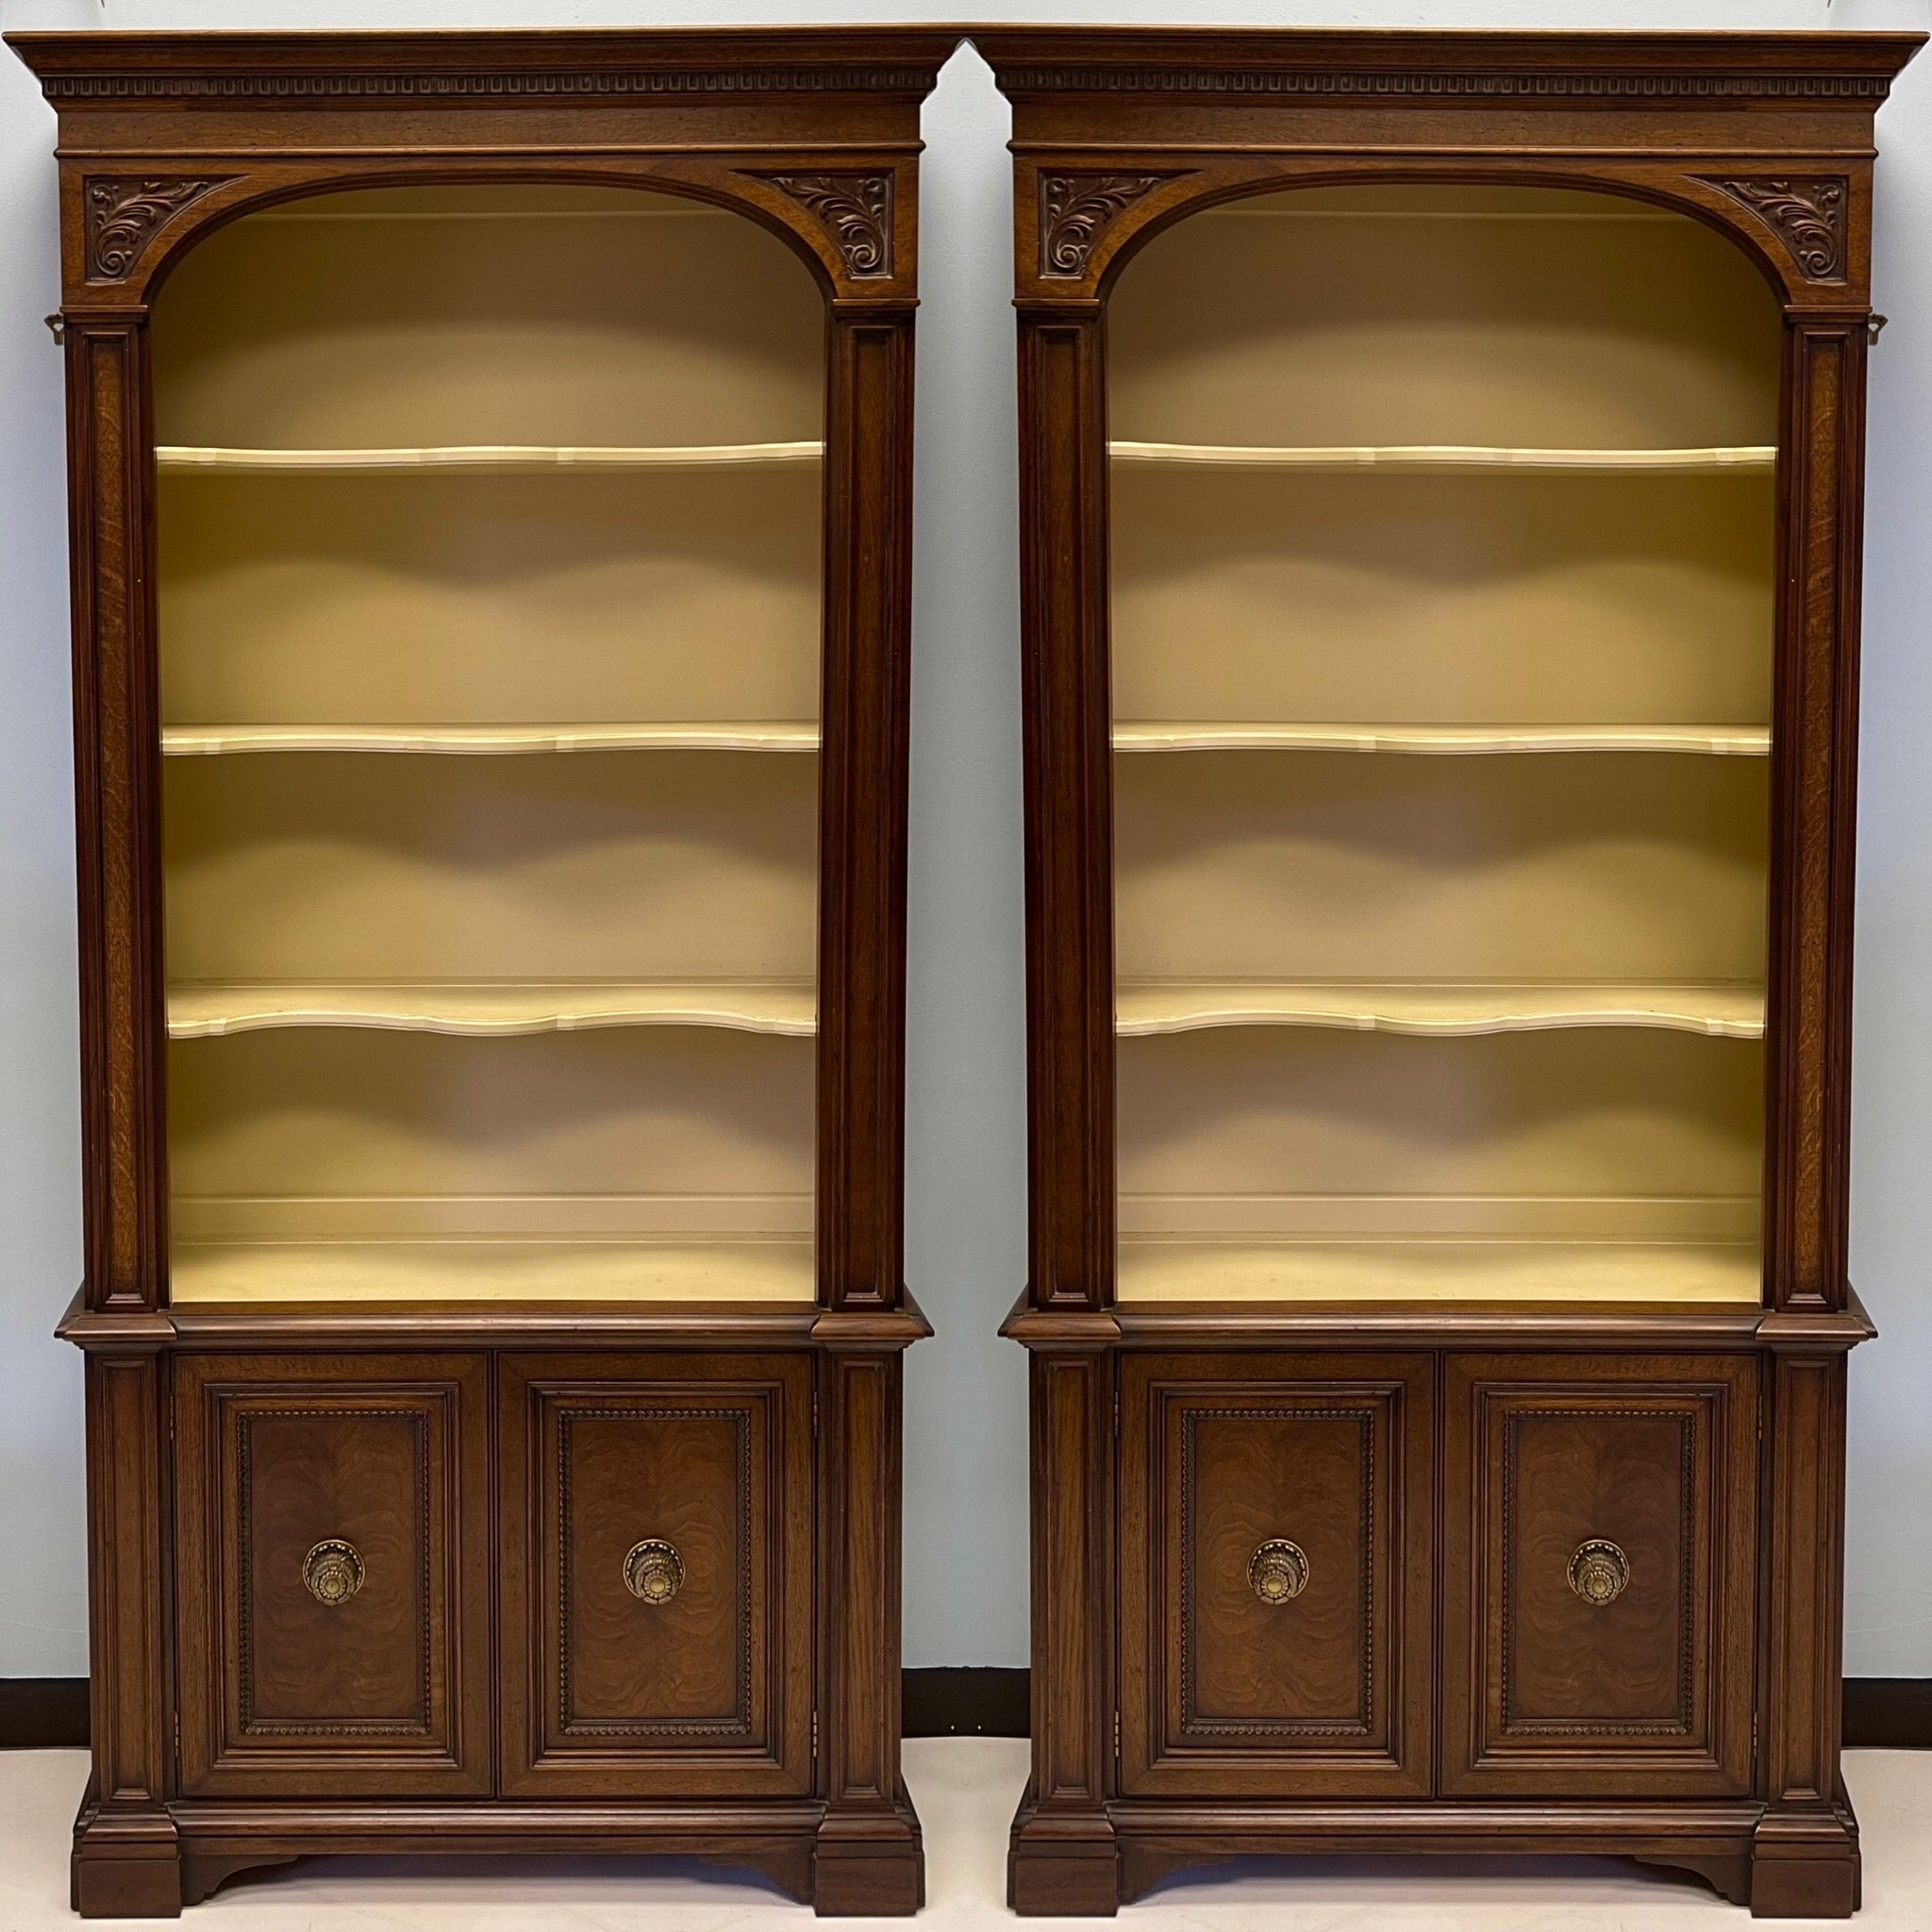 These wonderful bookccases are carved fruitwood with burled doors. The top portion has serpentine styling, and the paint could be interpreted as a soft yellow or warm ivory. They are unmarked and in very good condition. It is 12 inches between the